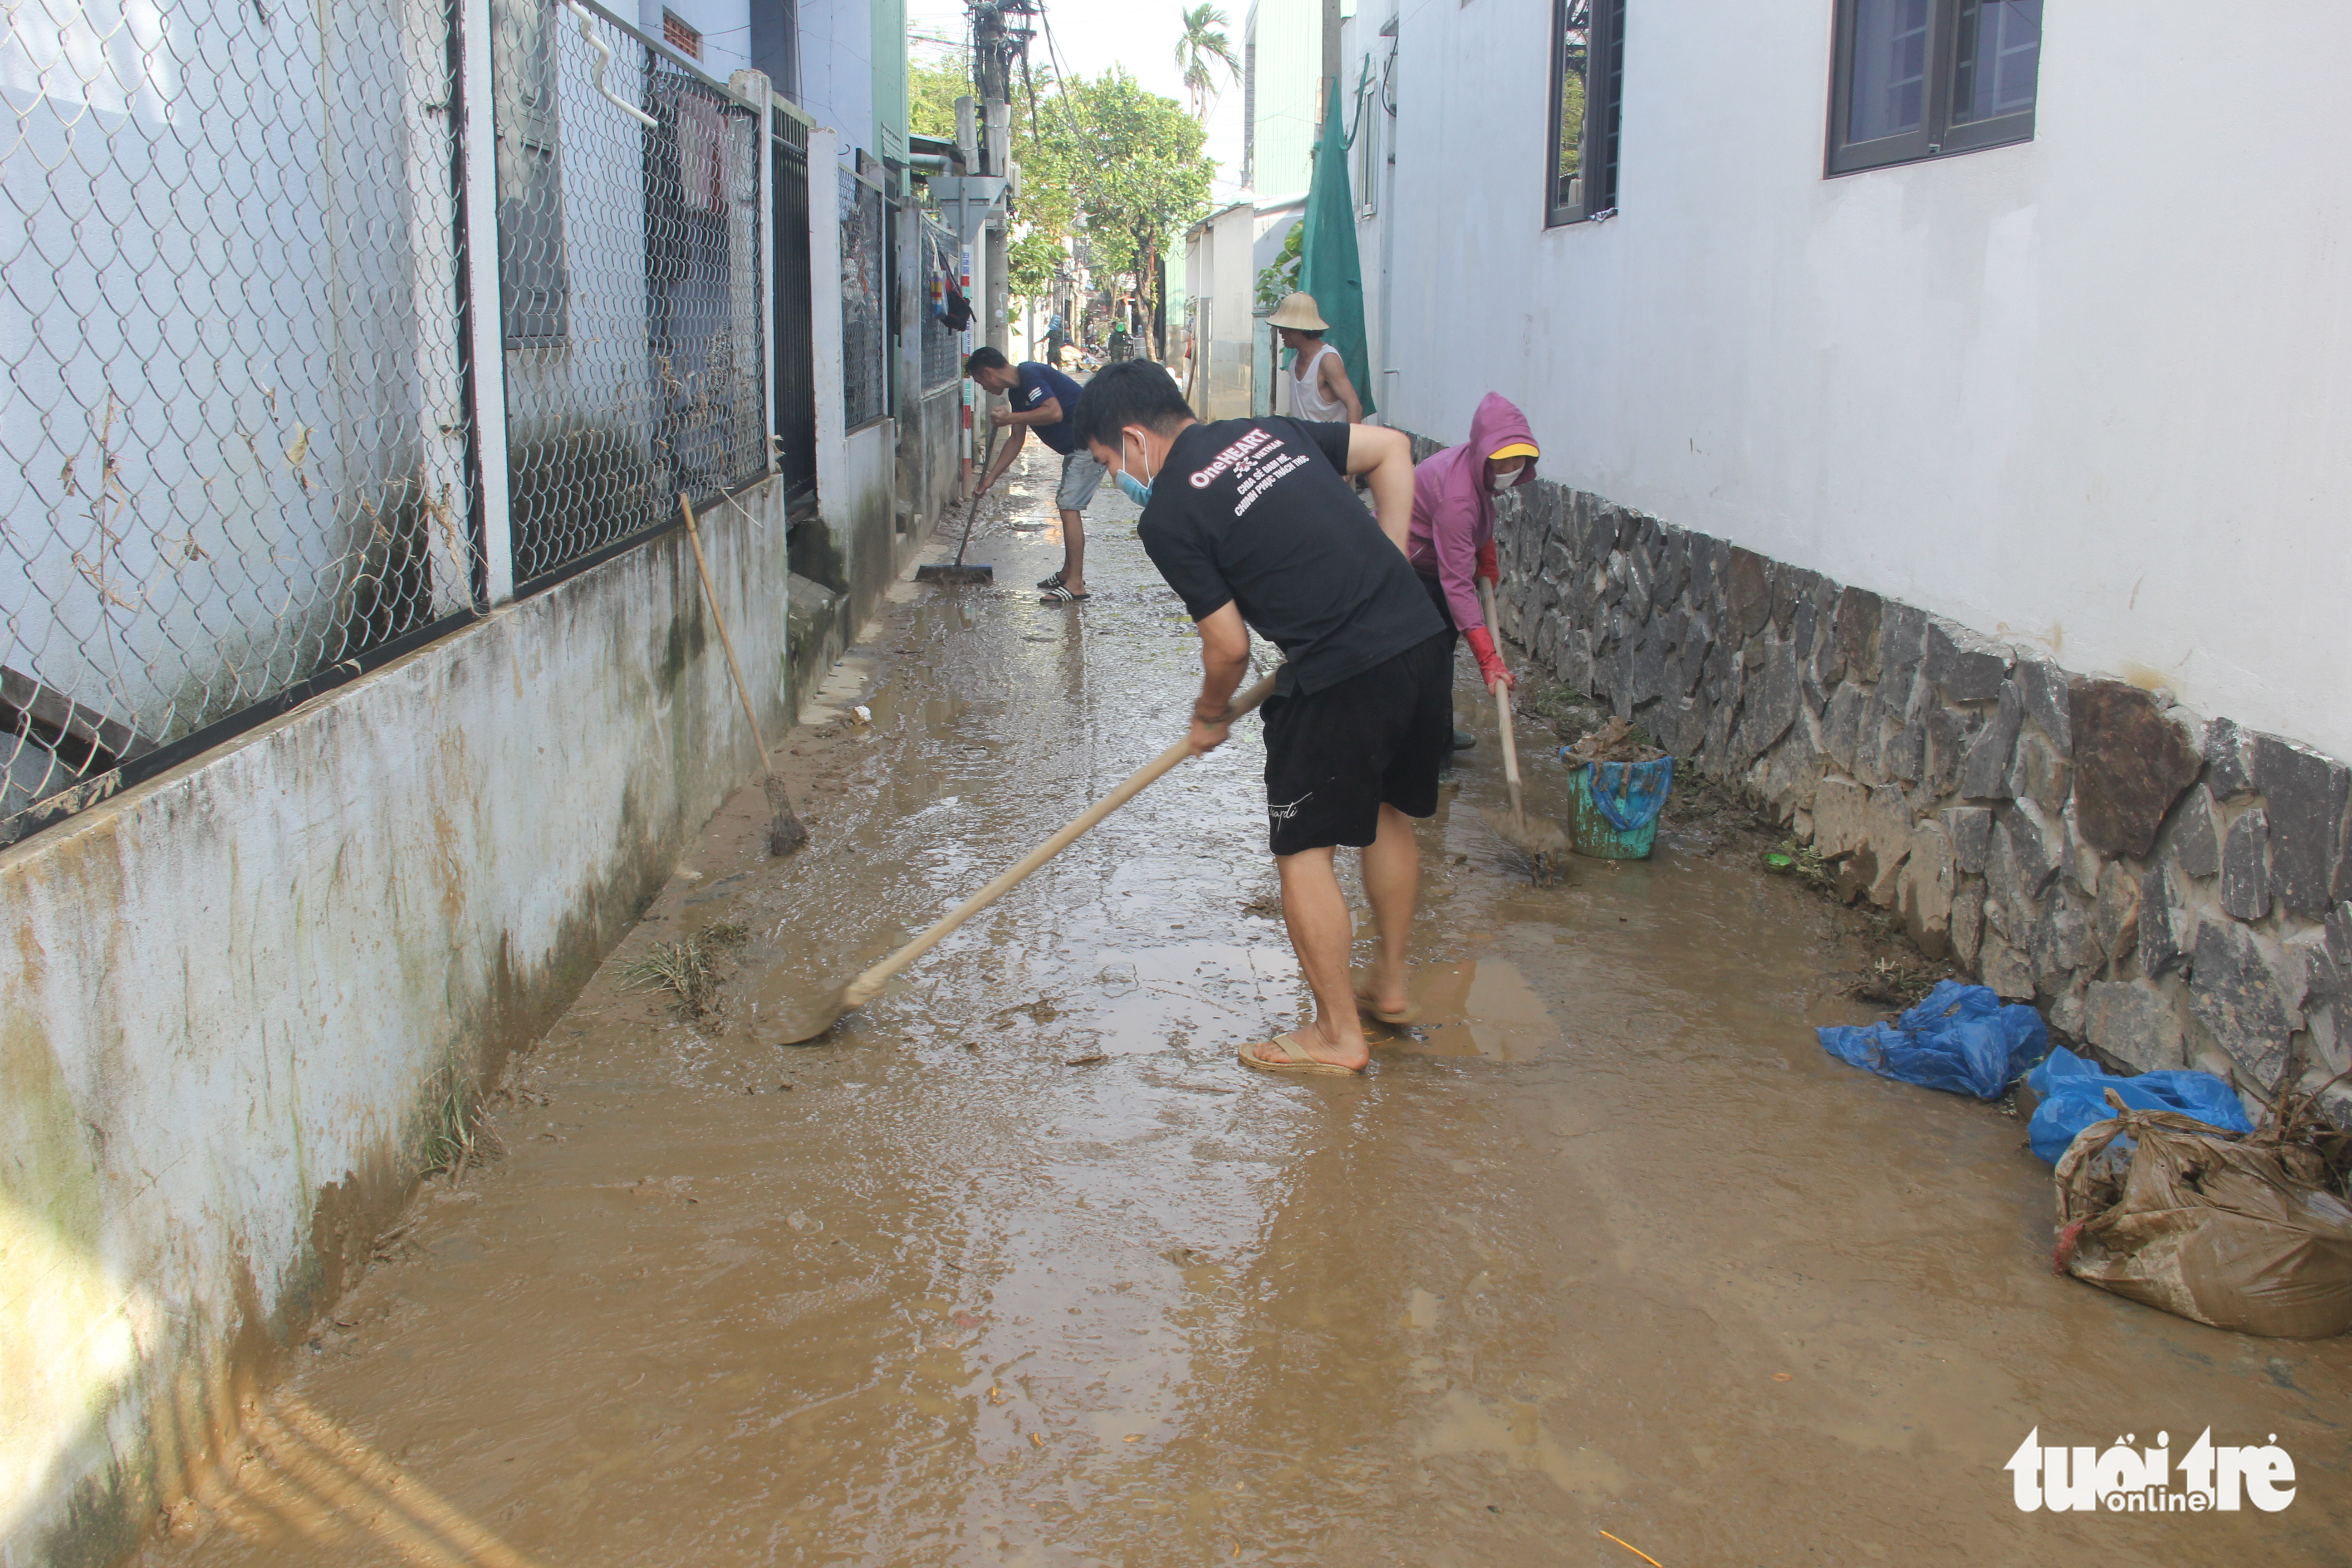 Residents clean up an alley in Lien Chieu District, Da Nang City, Vietnam, October 18, 2022. Photo: Truong Trung / Tuoi Tre